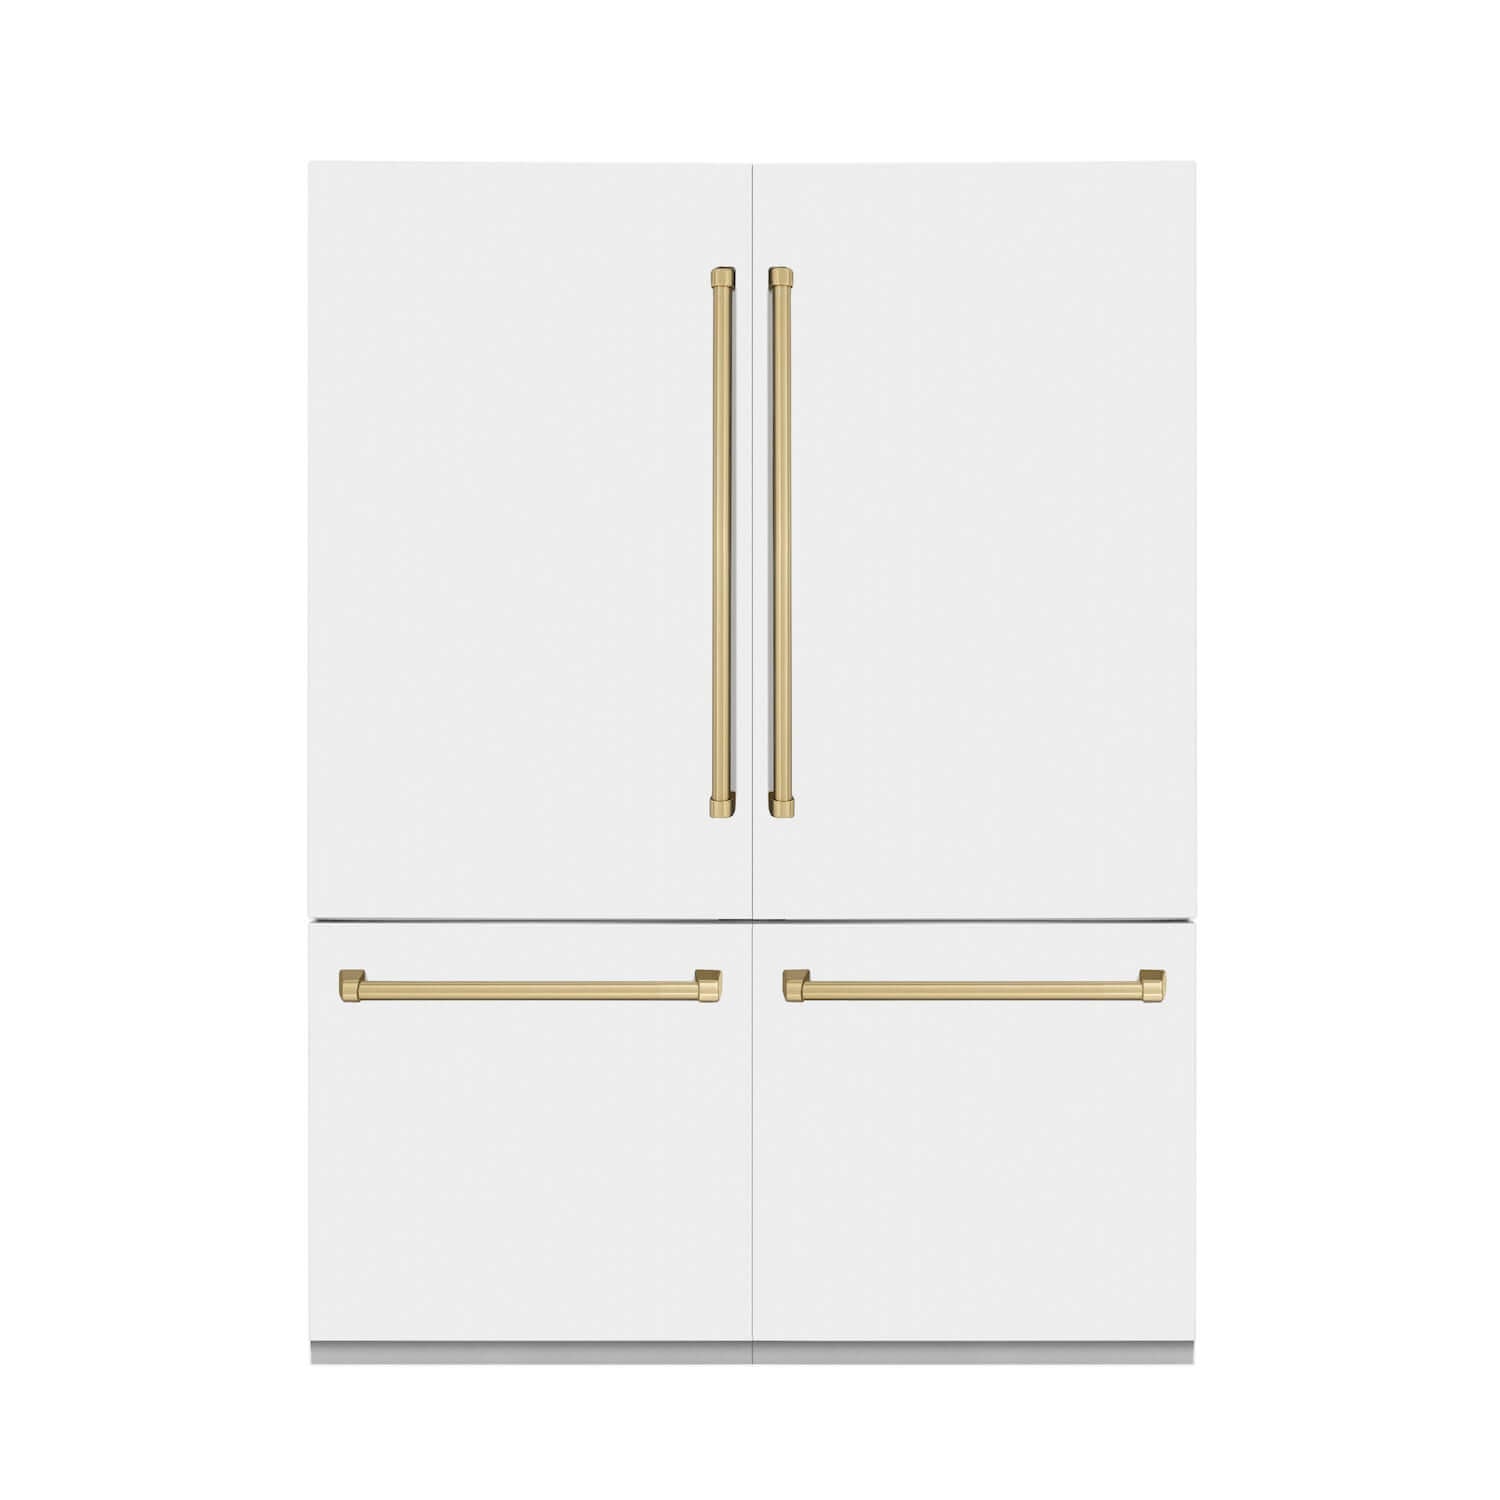 ZLINE 60 Autograph Edition 32.2 Cu. ft. Built-In 4-Door French Door Refrigerator with Internal Water and Ice Dispenser in White Matte with Champagne